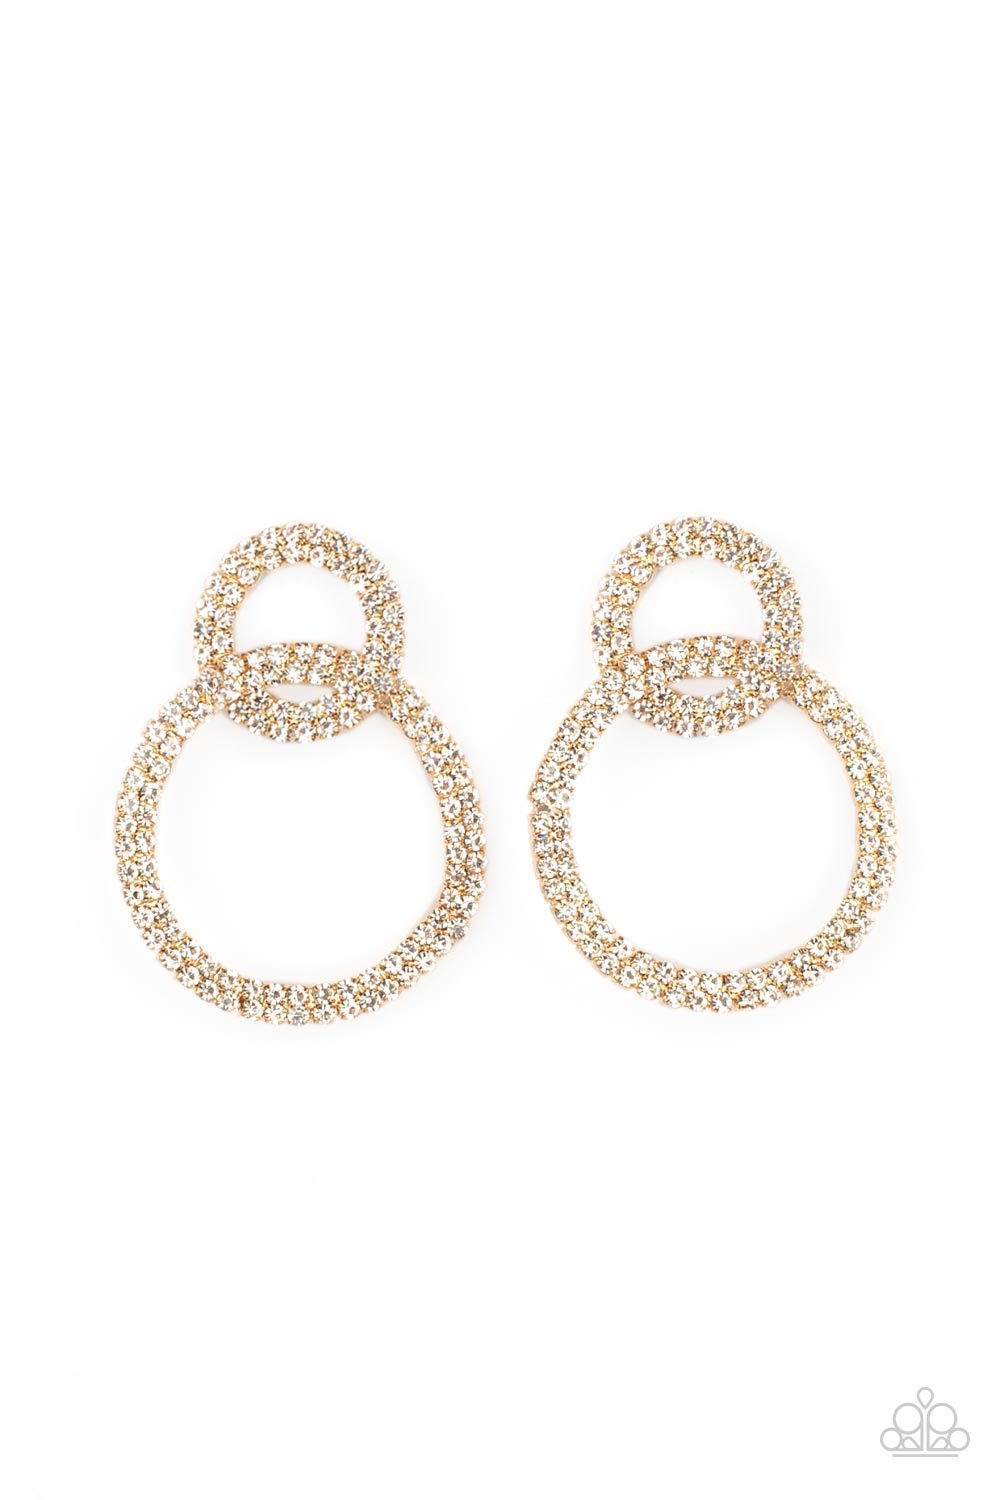 INTENSELY ICY GOLD-EARRINGS